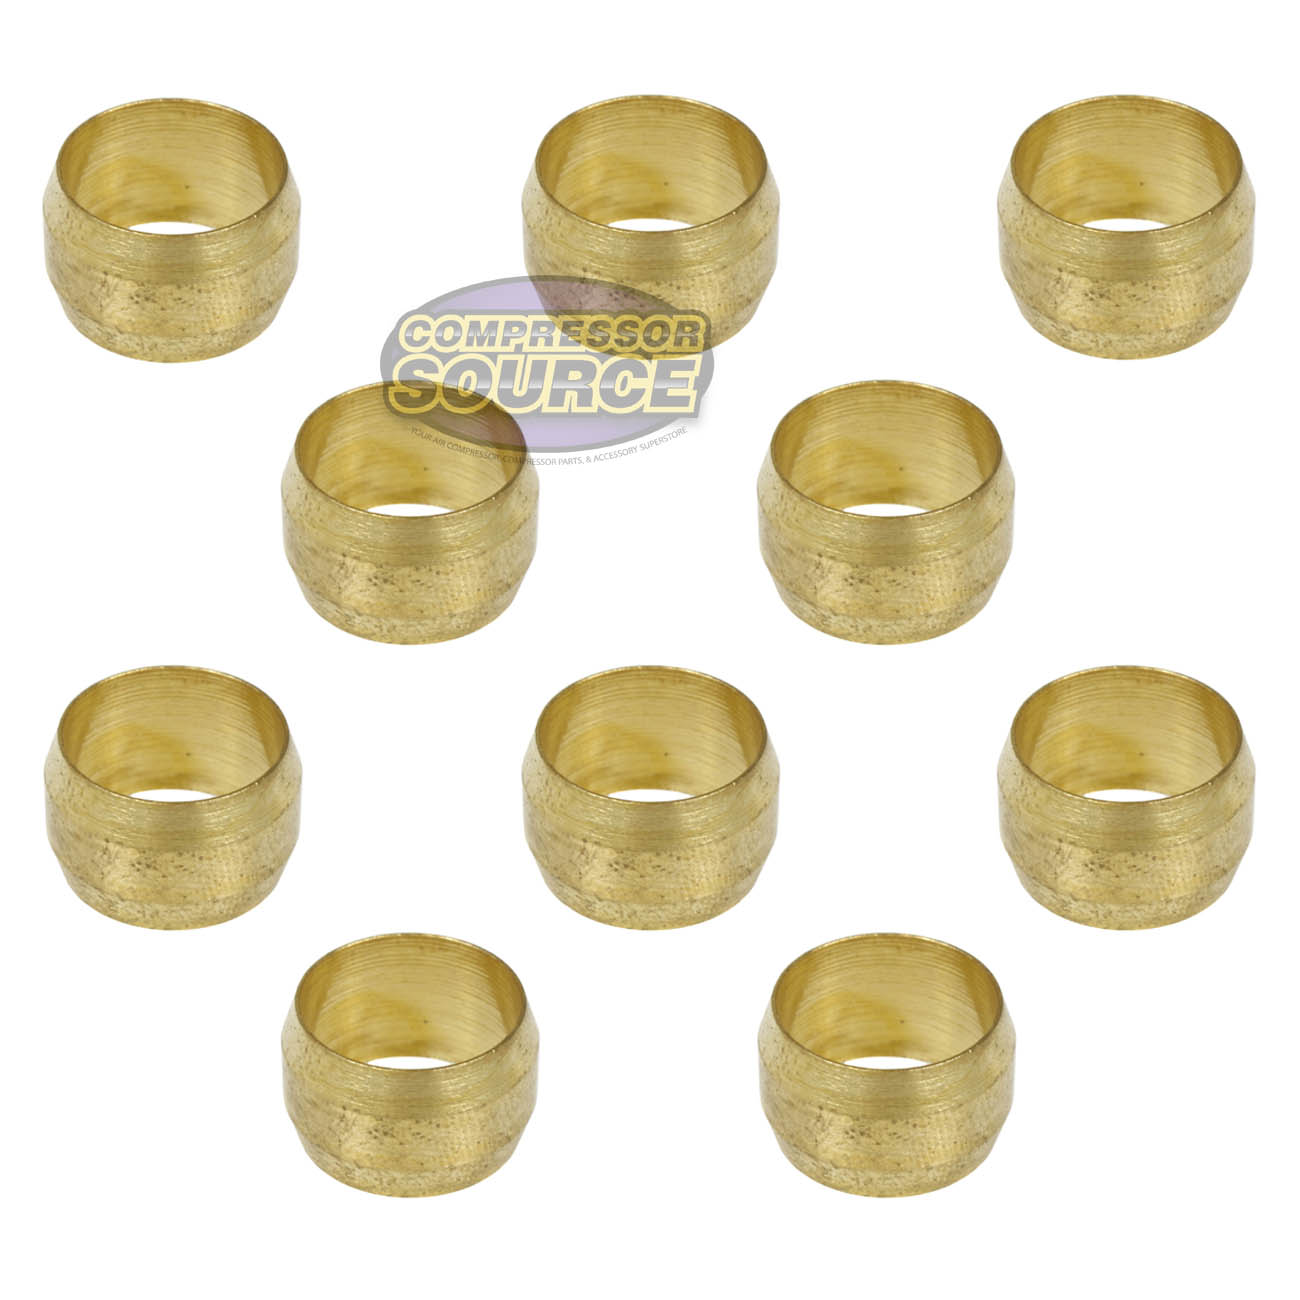 10 Pack 1/2" Compression Sleeve Solid Brass Ferrule for 1/2" Compression Tubing